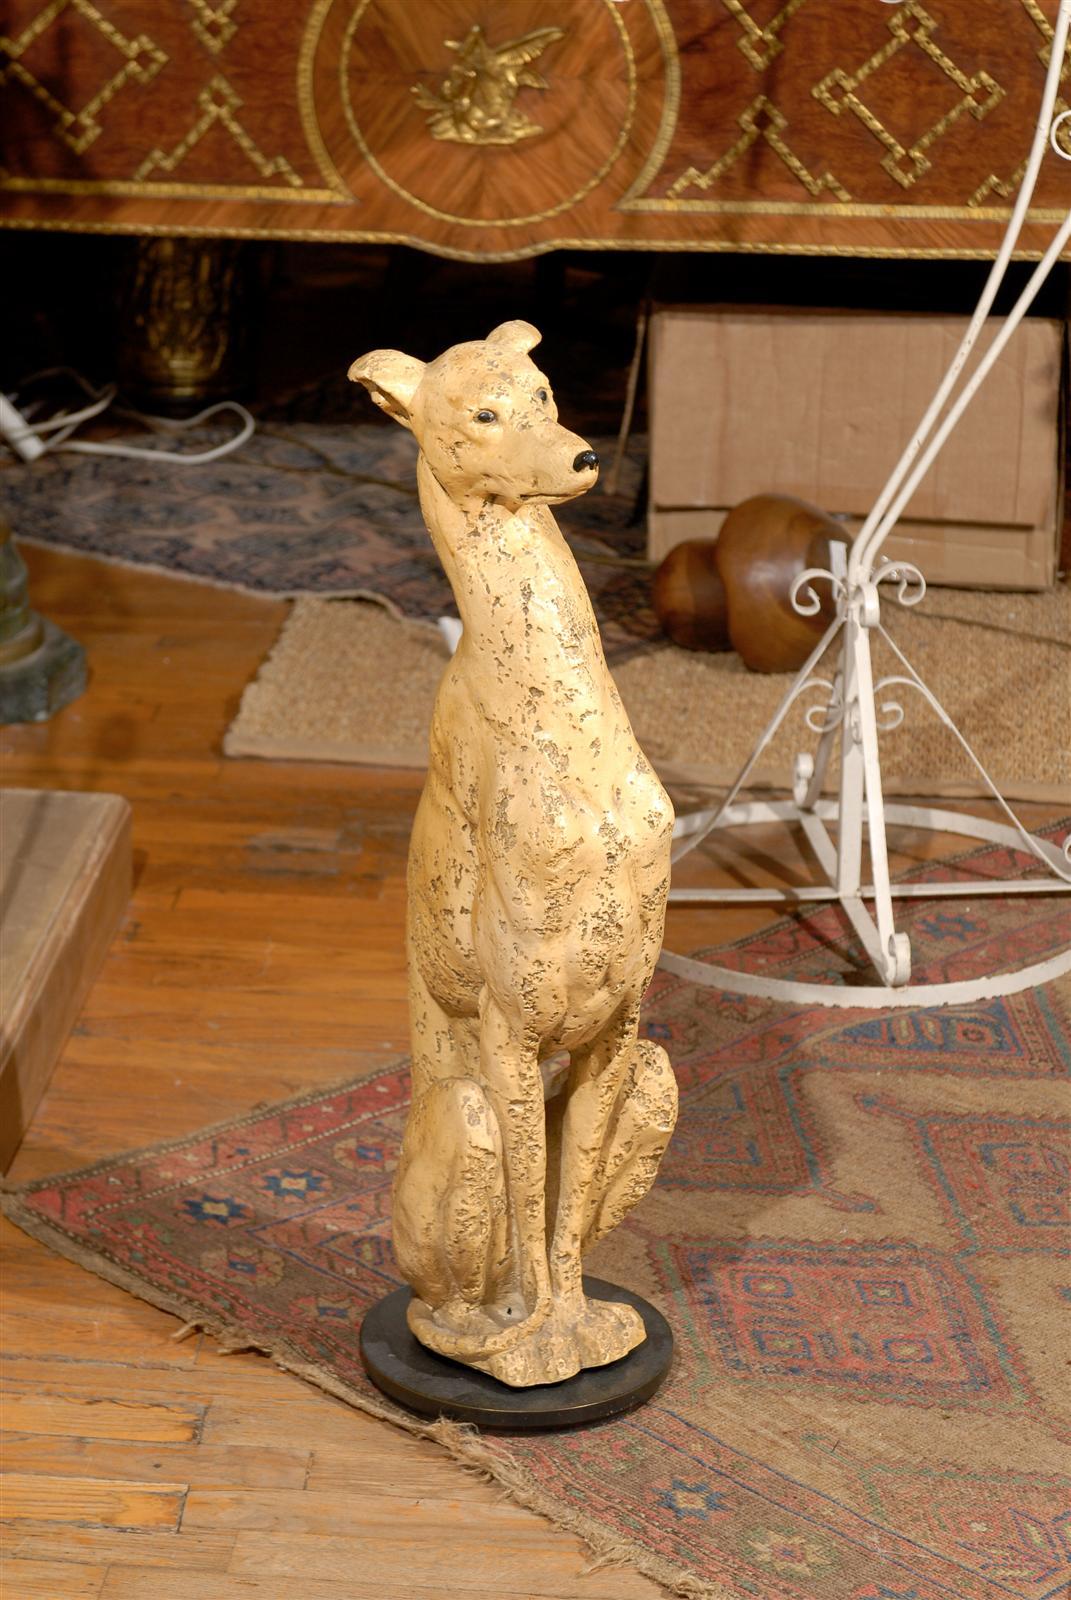 Hollywood Regency plaster statue with a pitted stone like finish of an Italian Greyhound or Whippet mounted on a circular iron platform base.